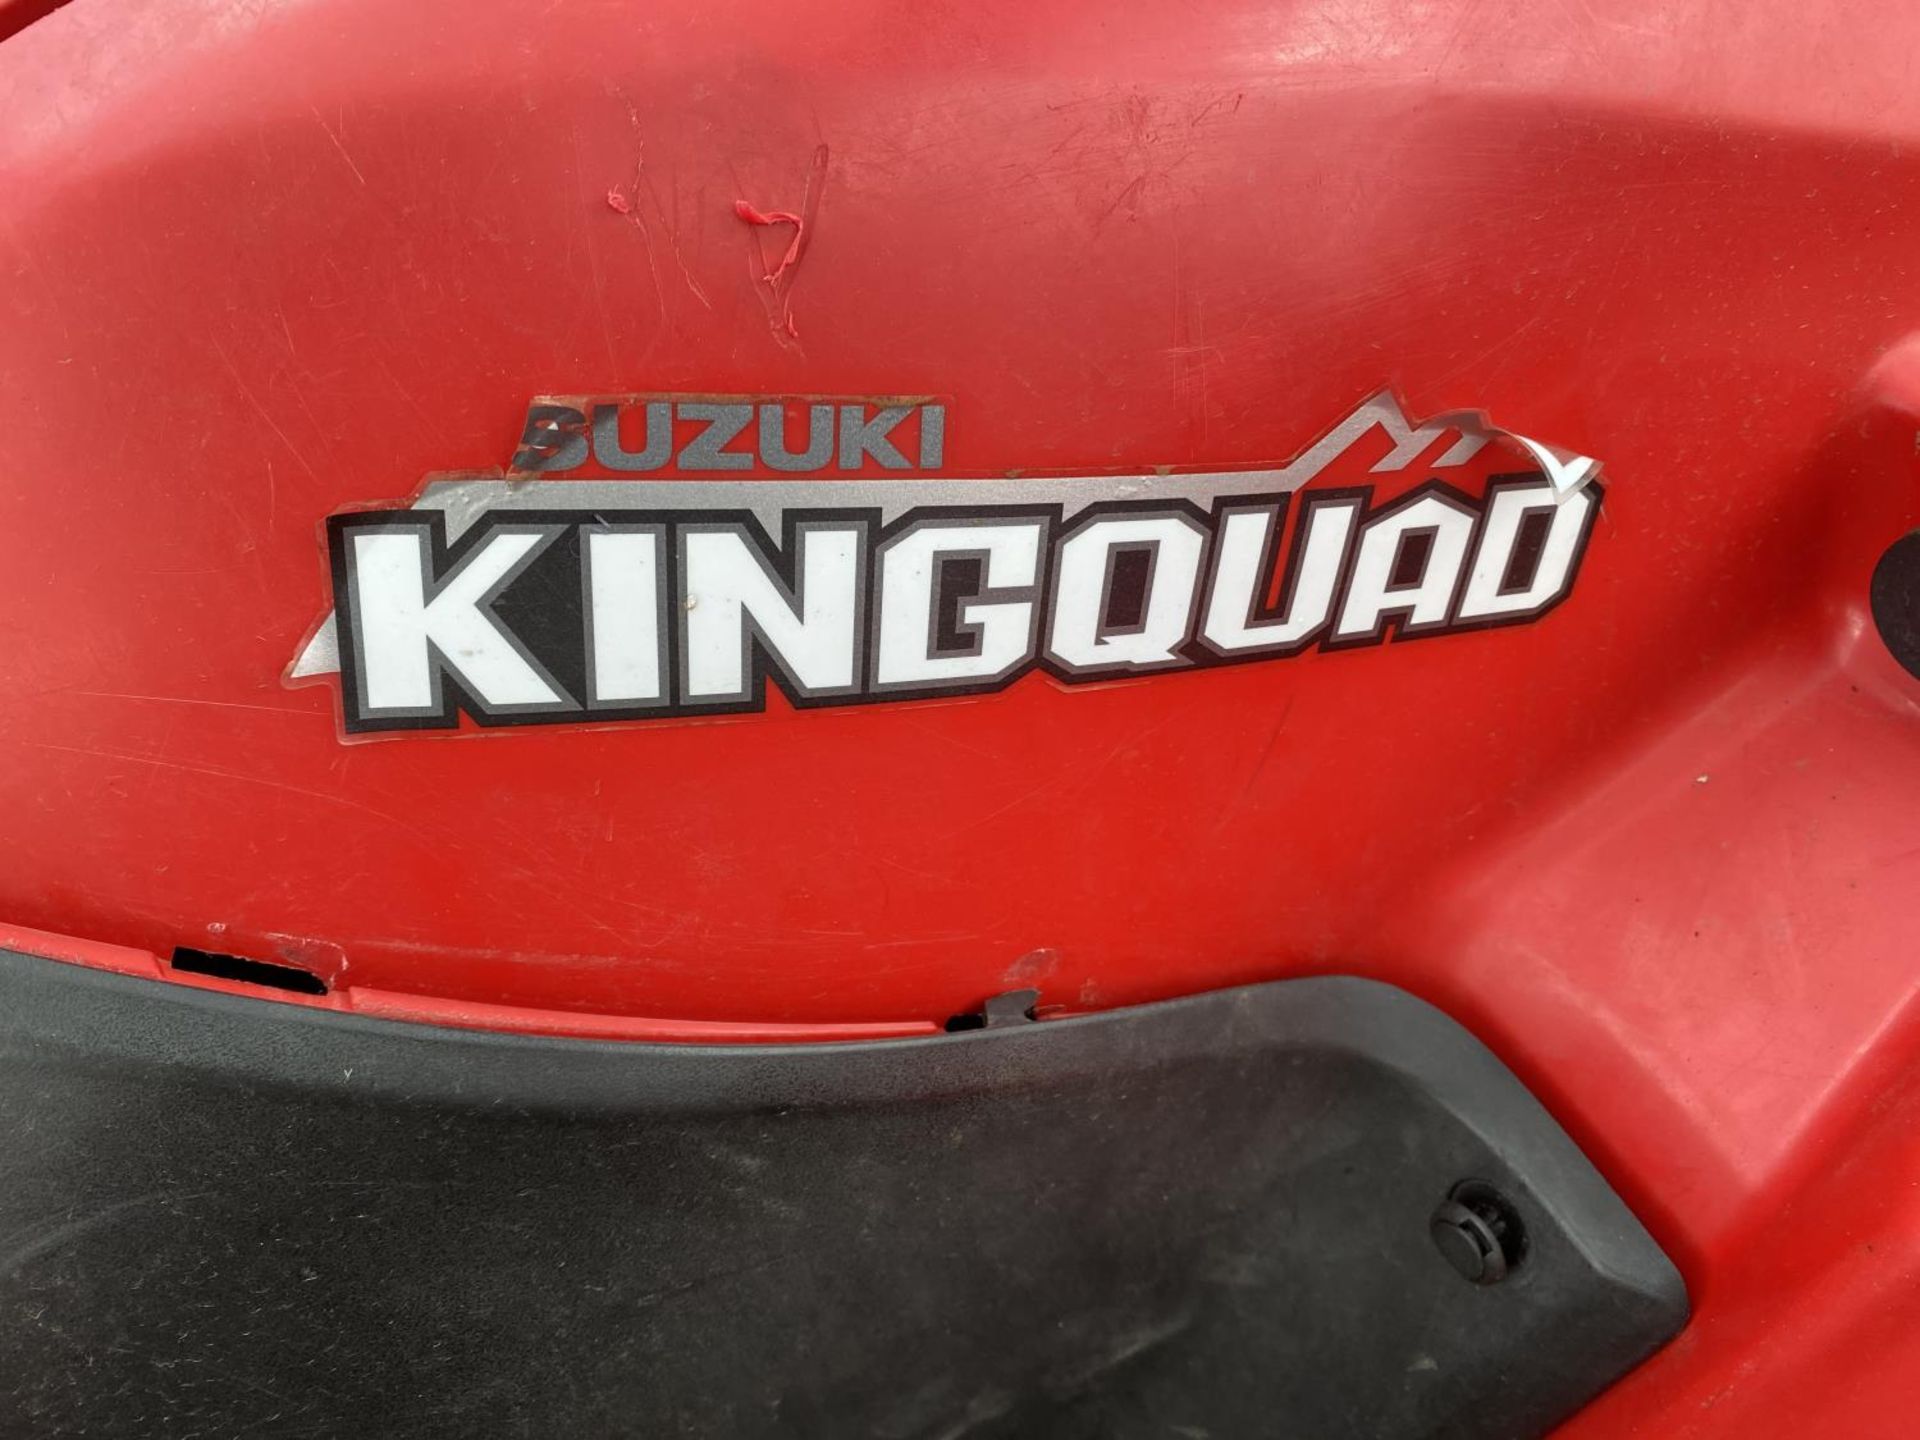 A 2014 SUZUKI KING QUAD, 500 CC WITH POWER STEERING - SEE VIDEO OF VEHICLE STARTING AND RUNNING AT - Image 3 of 3